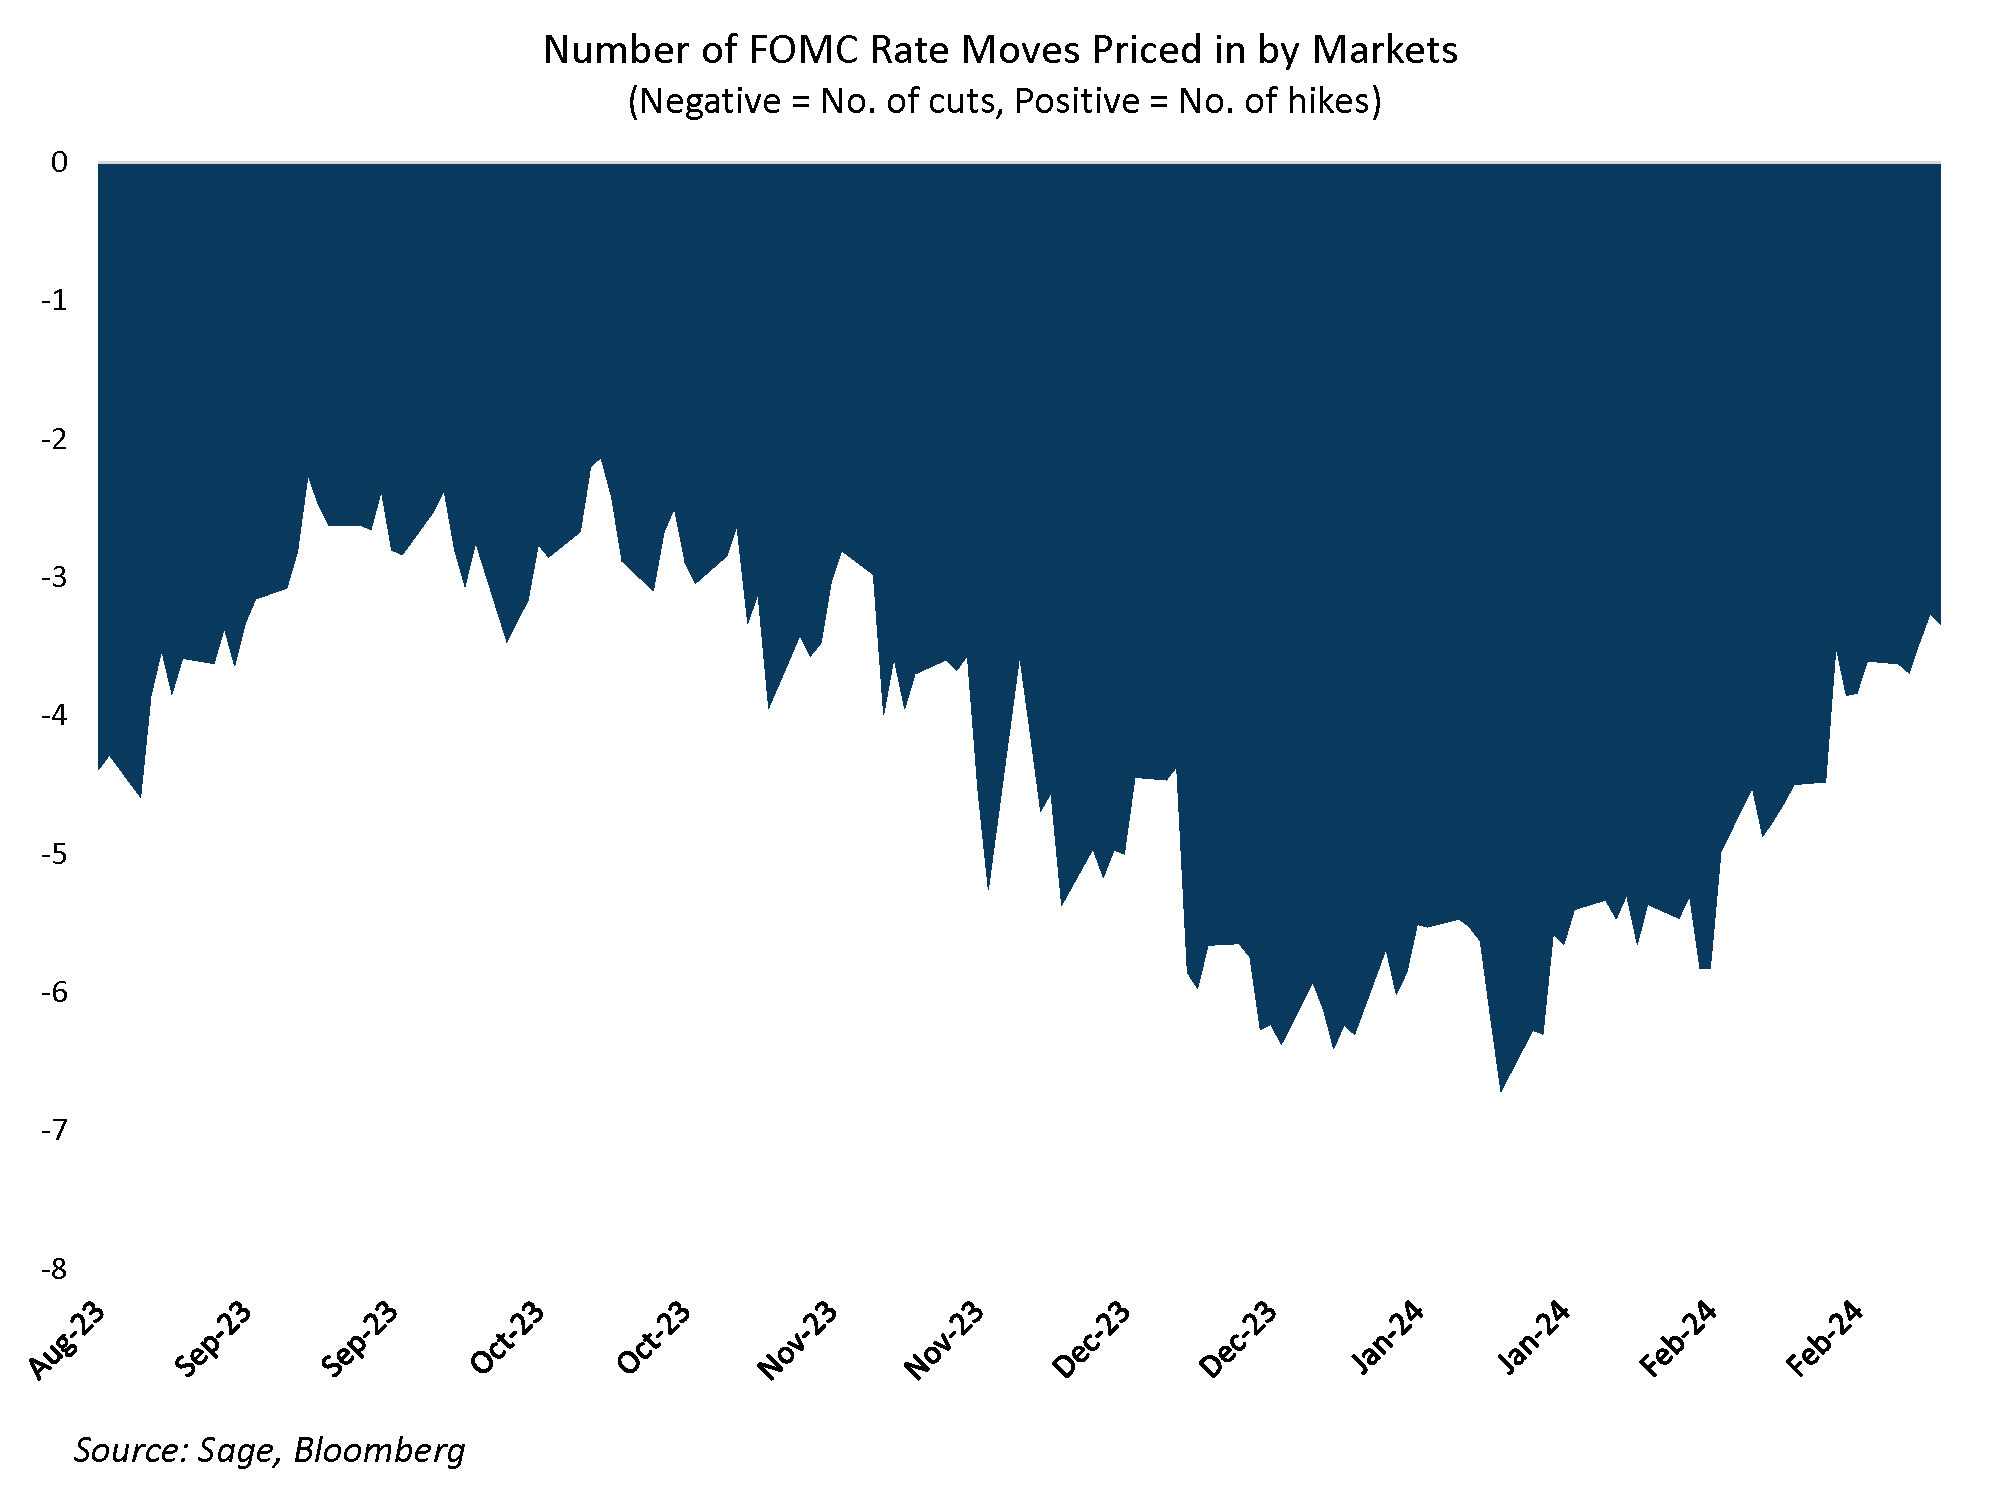 Number of FOMC Rate Moves Priced in by Markets